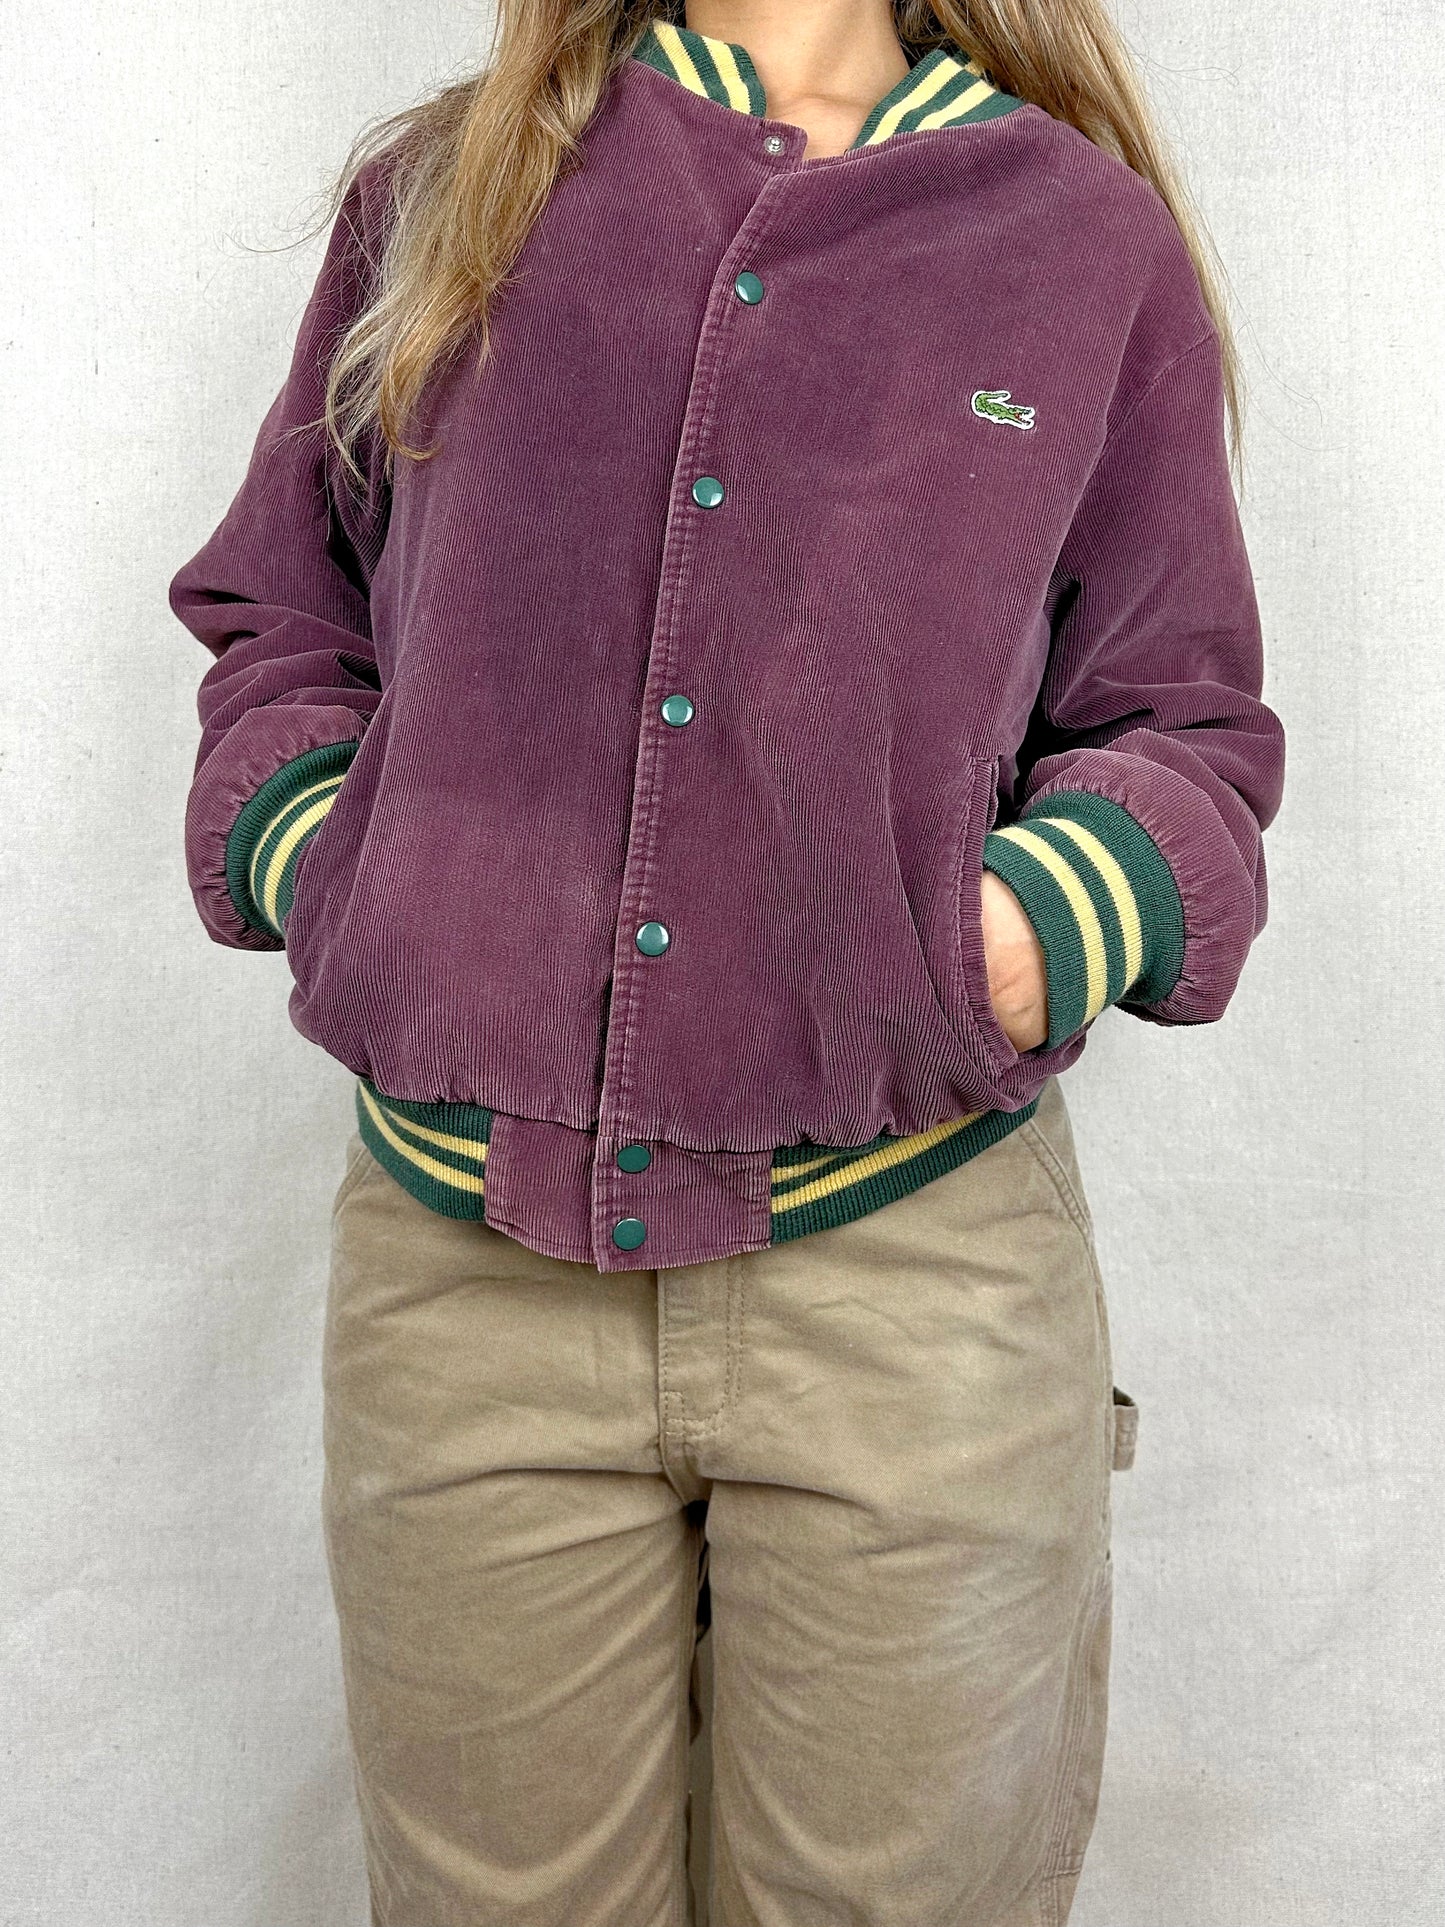 90's Lacoste Embroidered Corduroy Jacket Size 14